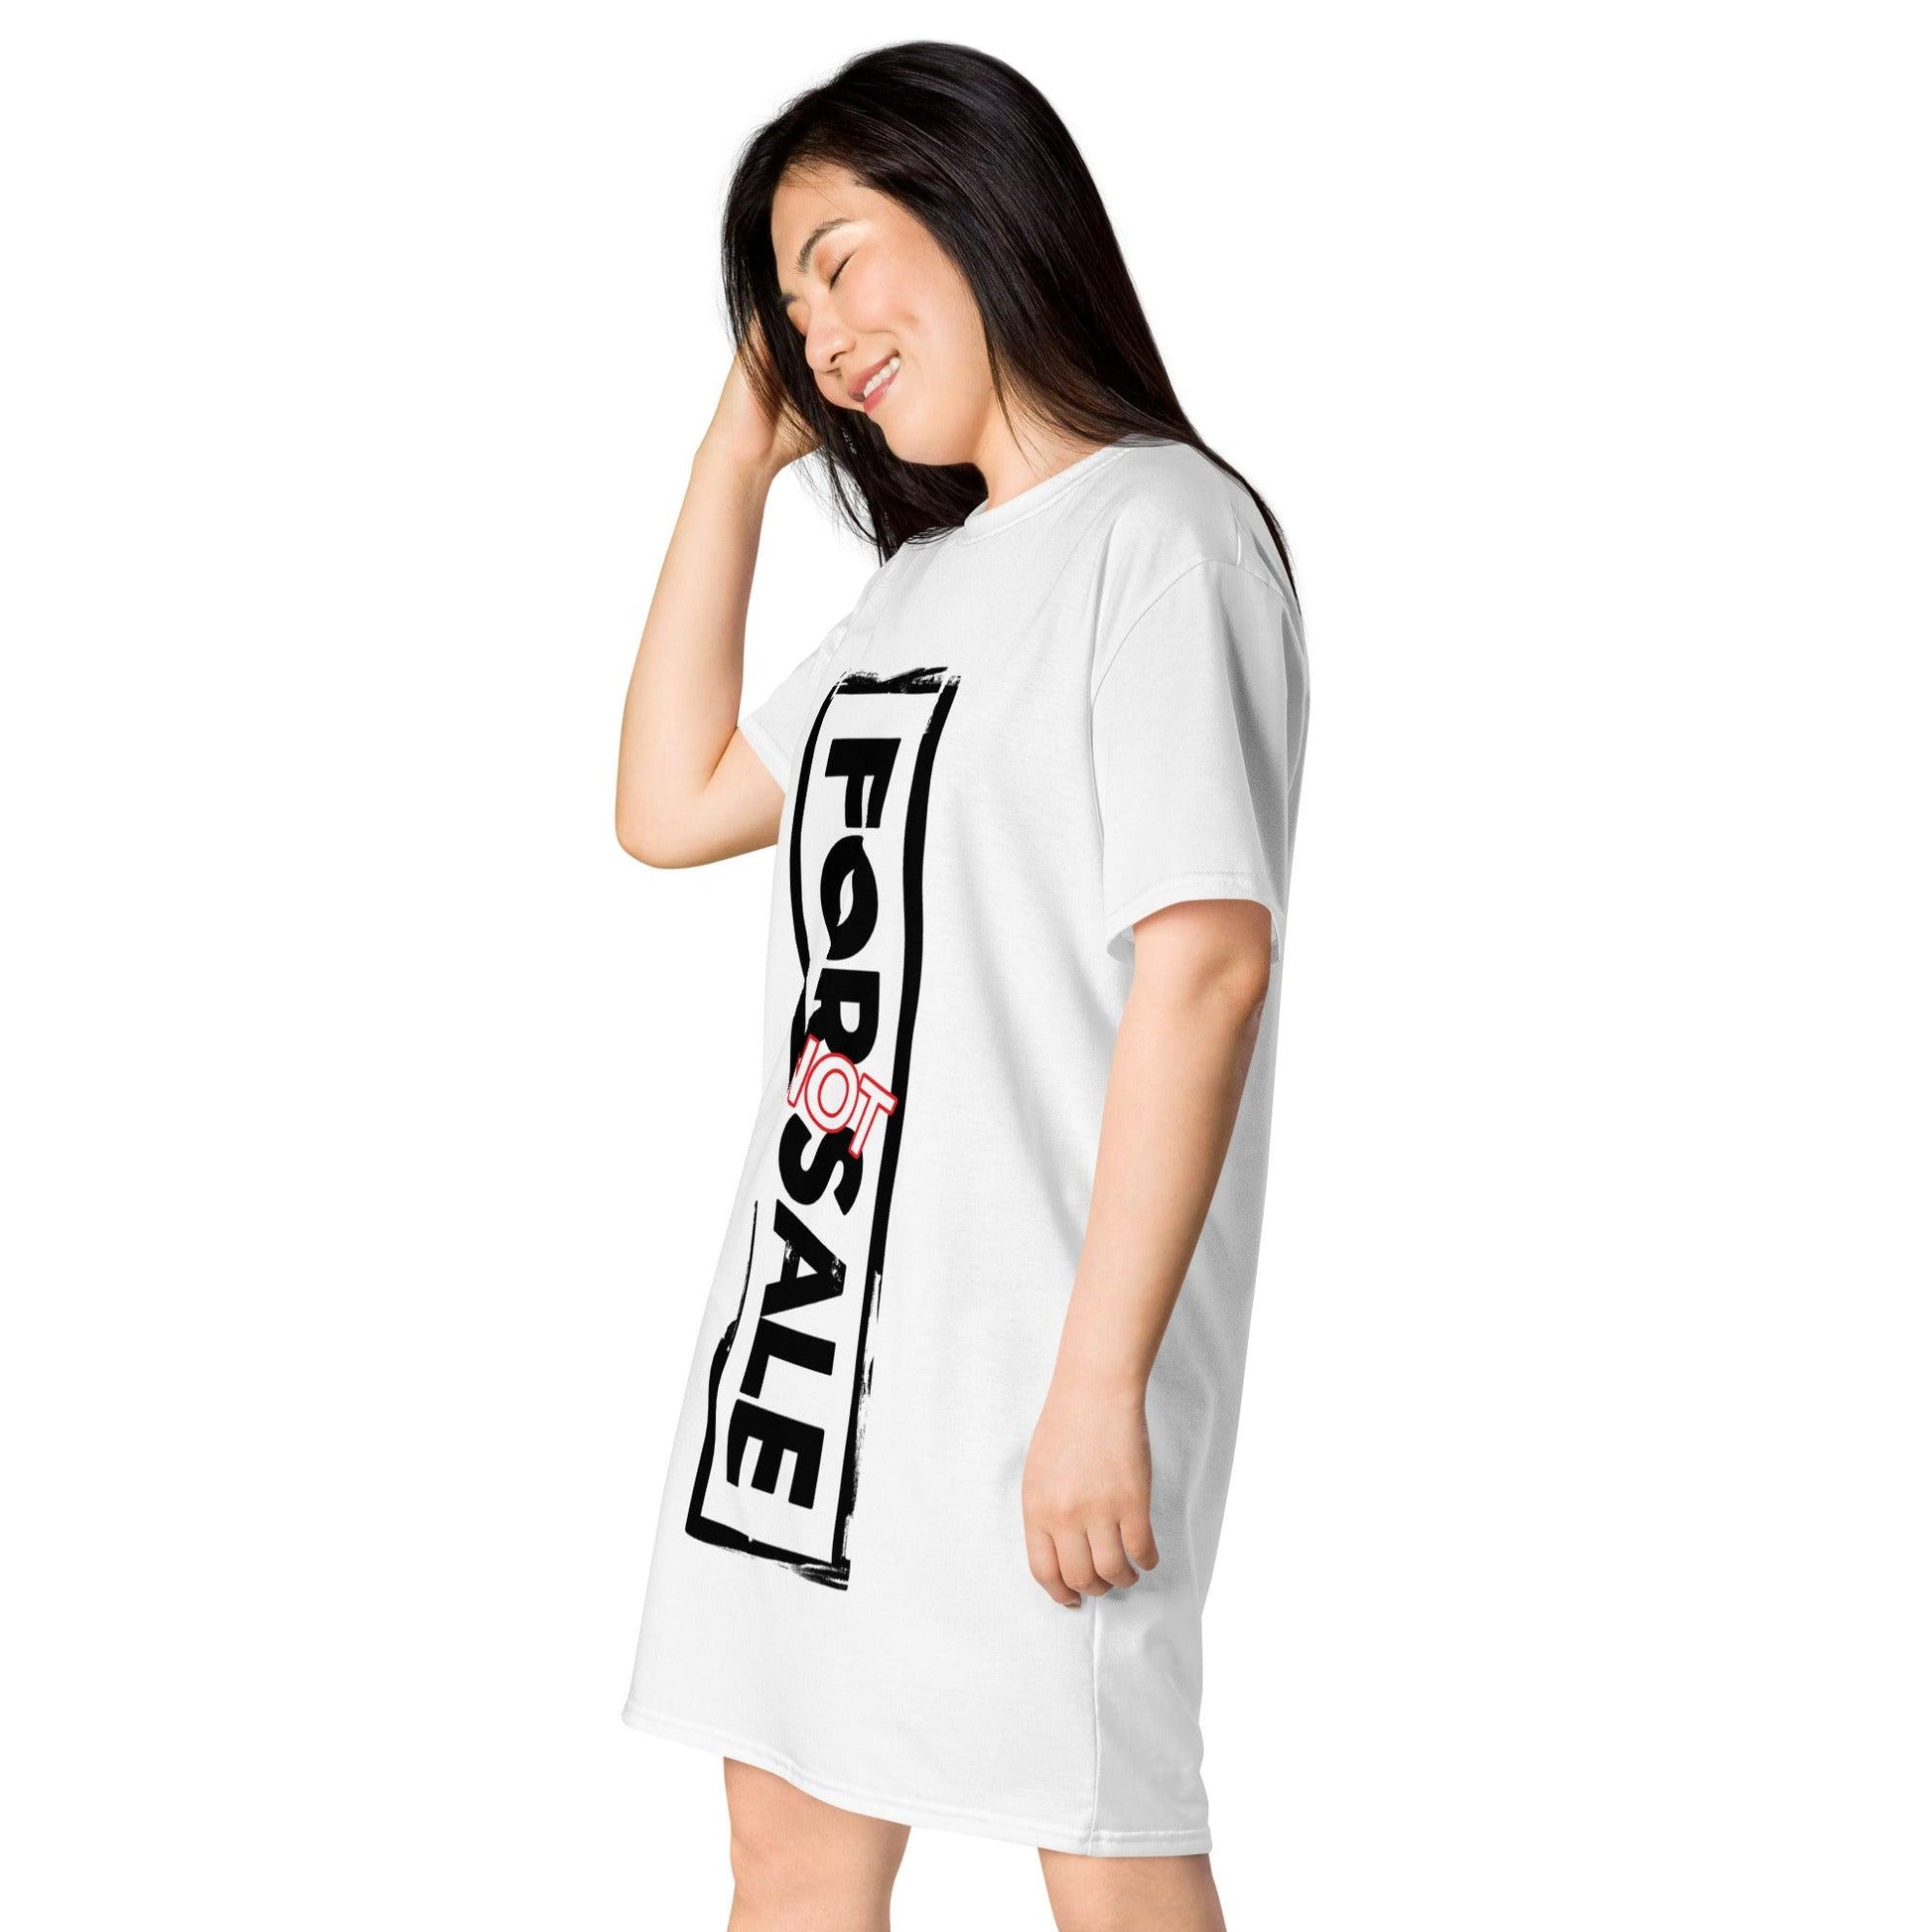 Not For Sale Black Stamp - Womens T-Shirt Dress - iSAW Company